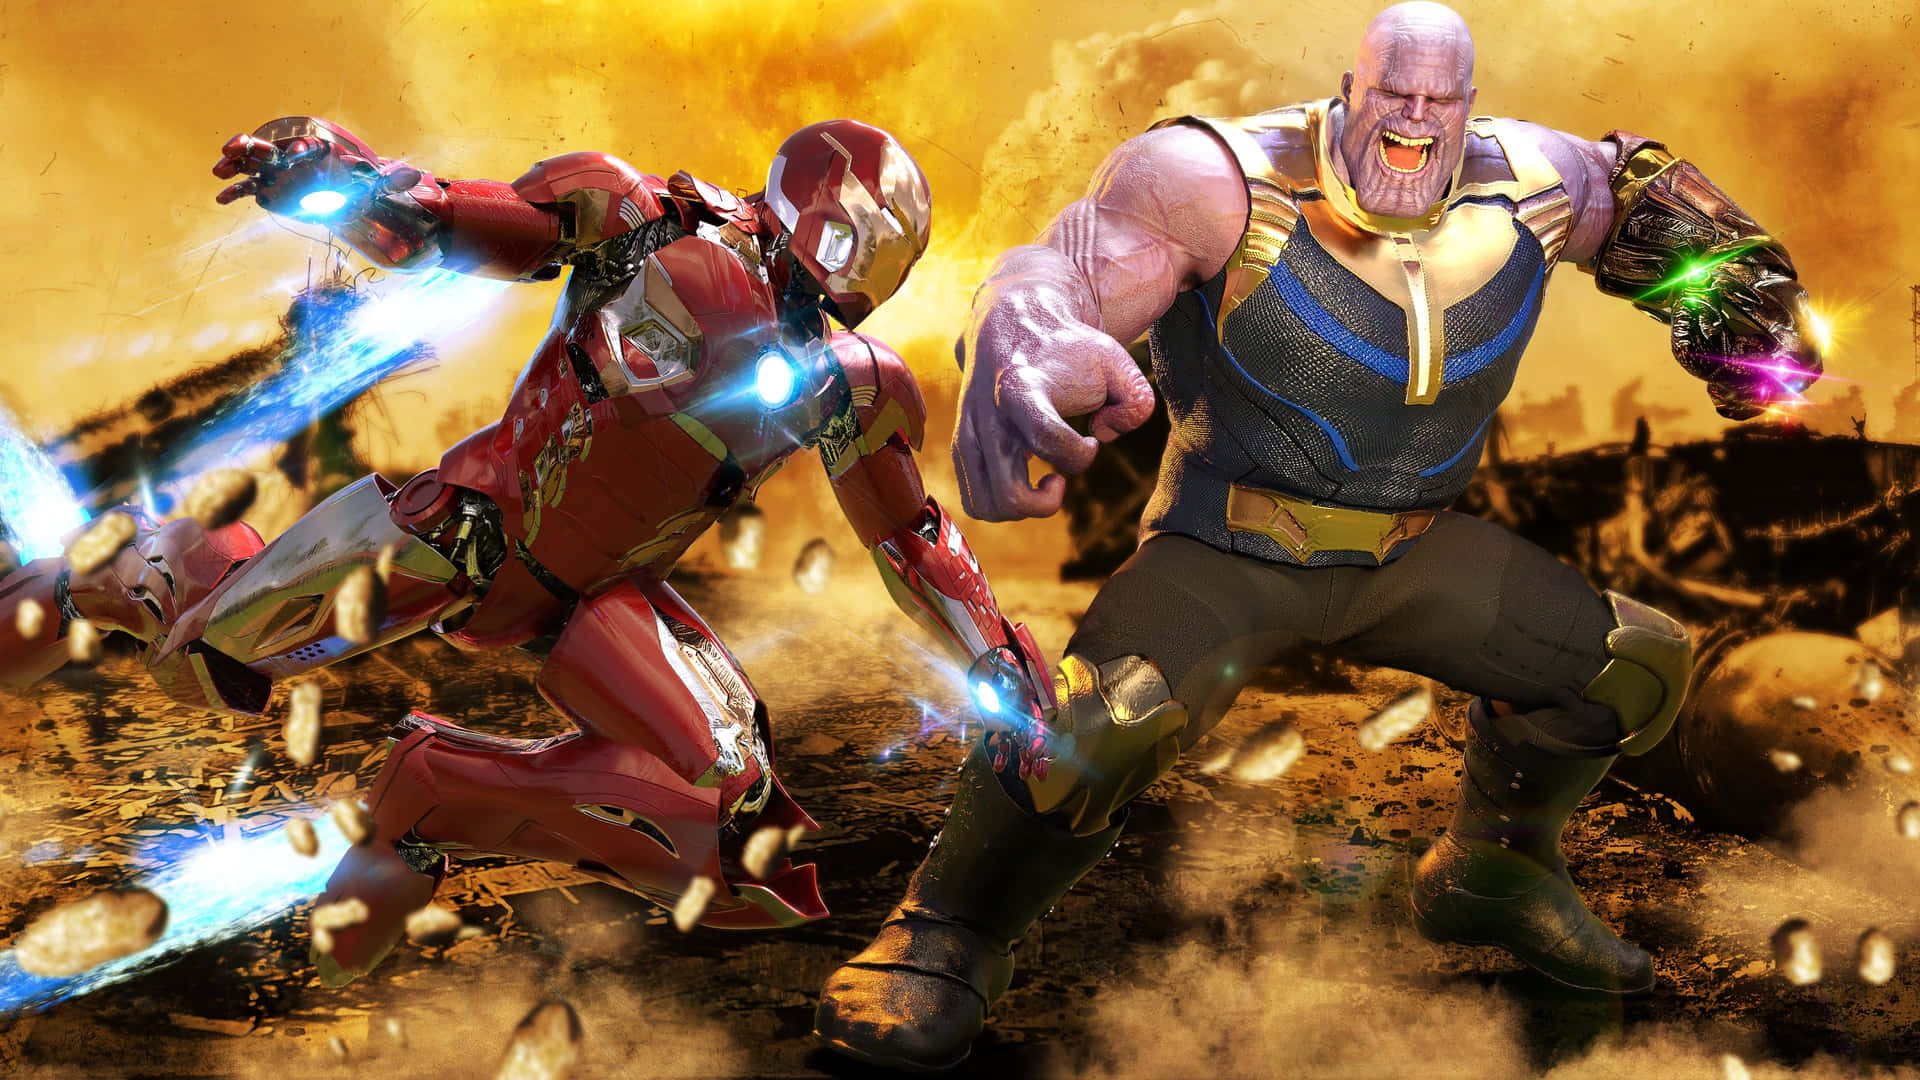 Iron Man and Thanos face off in a battle for the fate of the universe Wallpaper